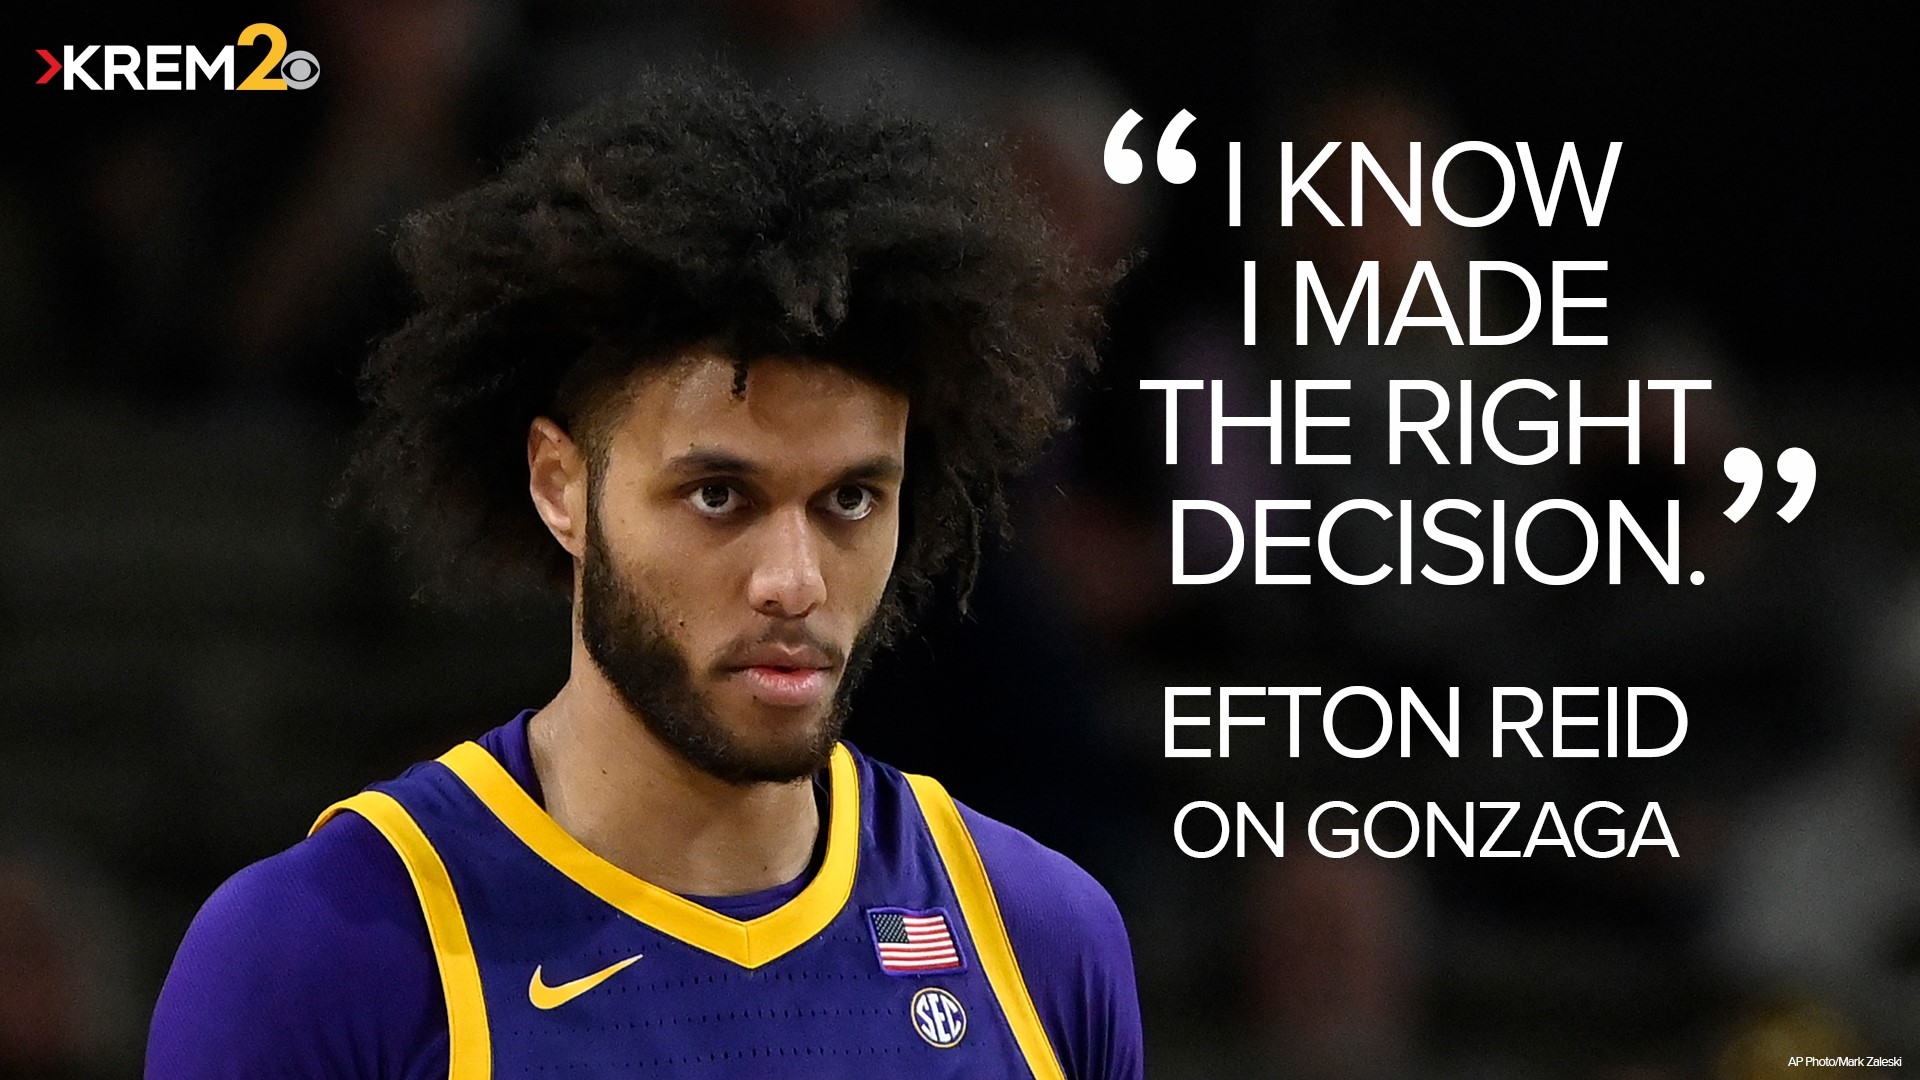 Efton Reid talks with KREM 2 Sports Director Brenna Greene about his decision to join the Gonzaga basketball team and why he knows it was the right thing to do.